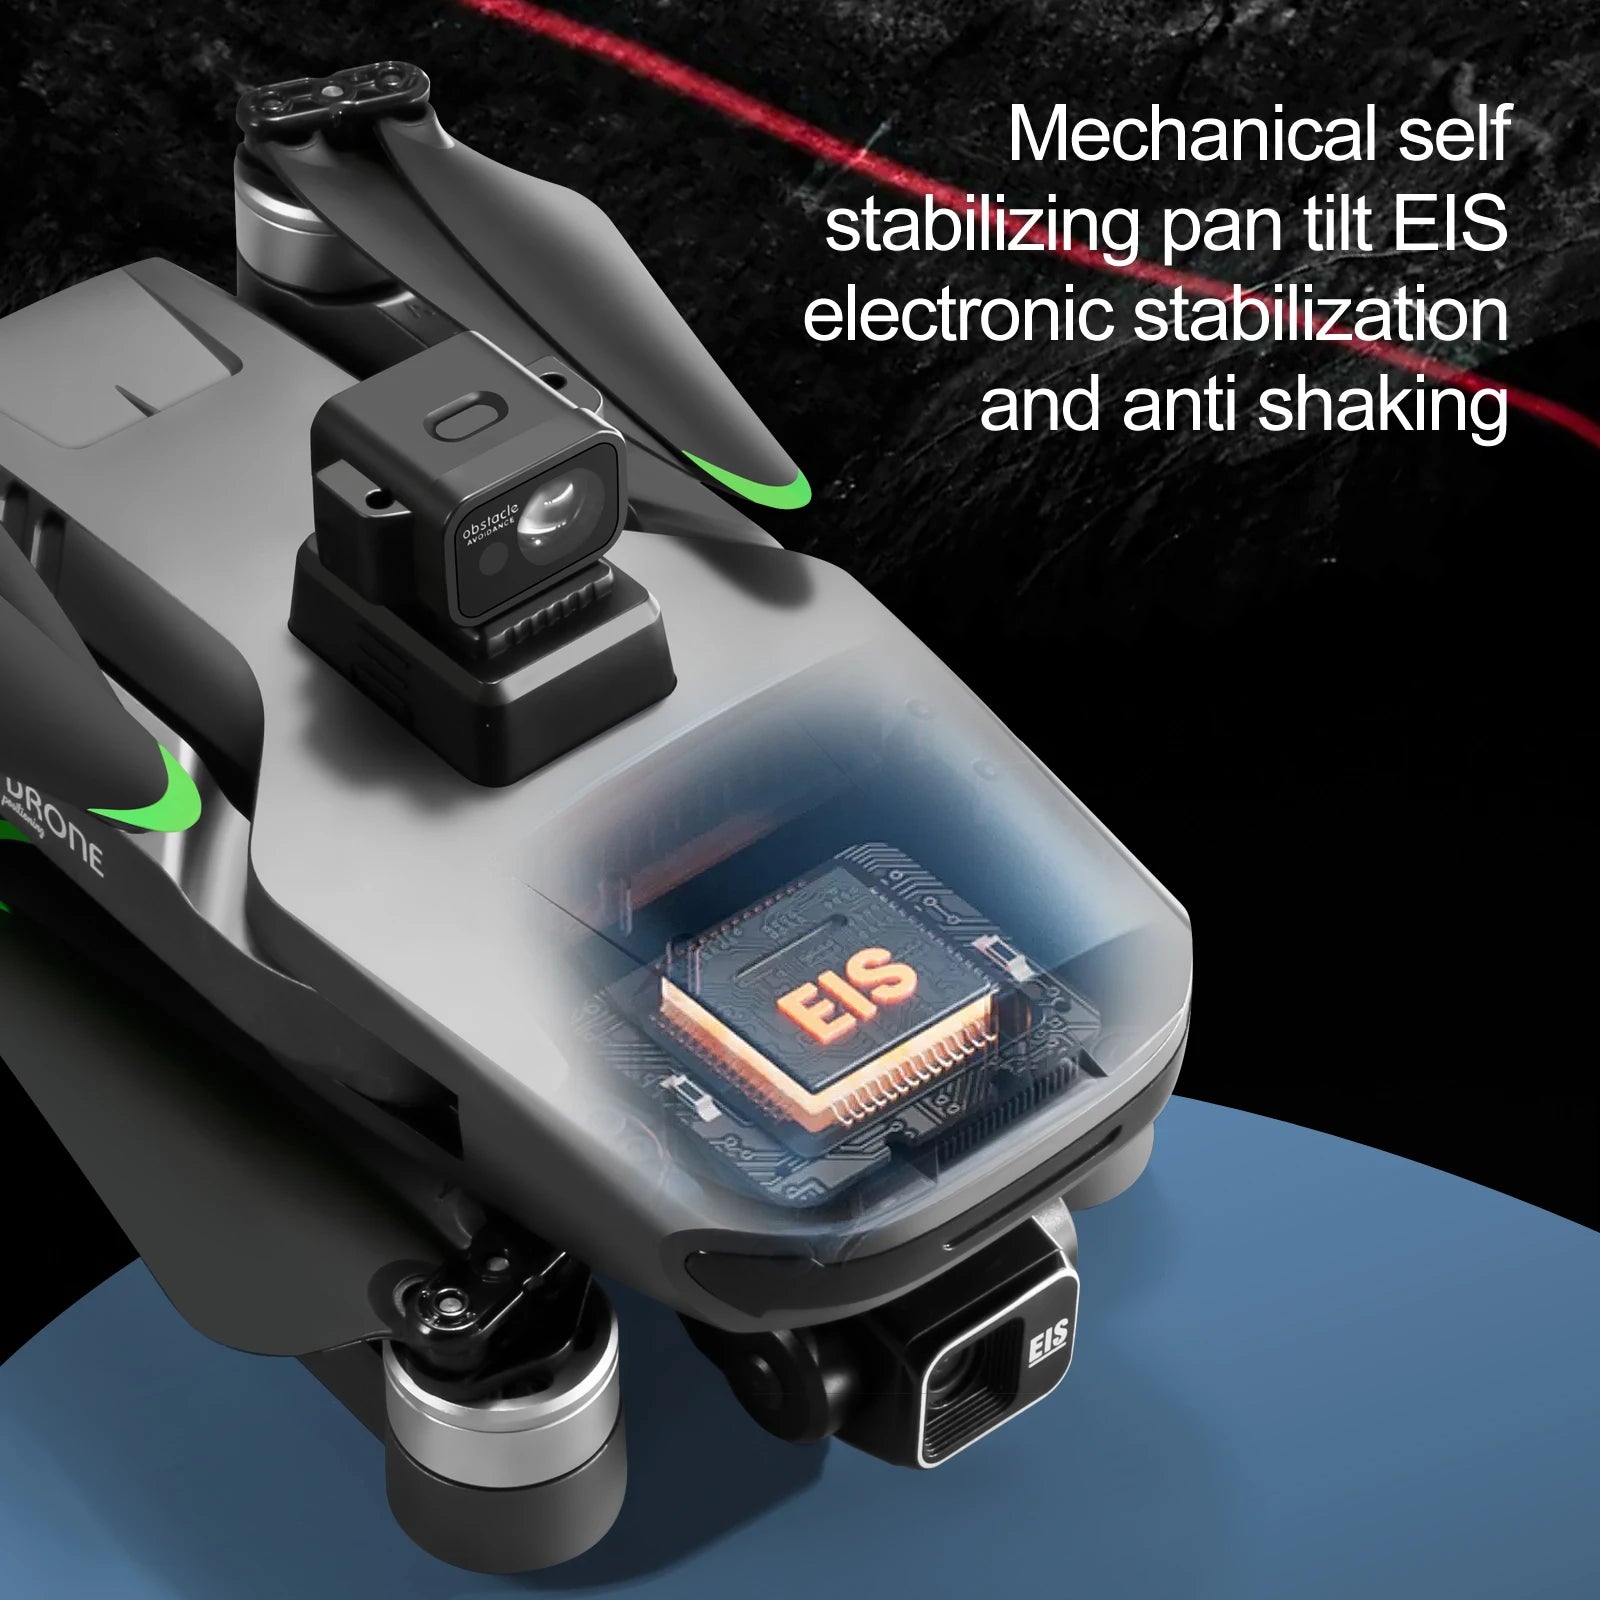 S155 Drone, Mechanical self stabilizing pan tilt EIS electronic stabilization and anti shaking op '